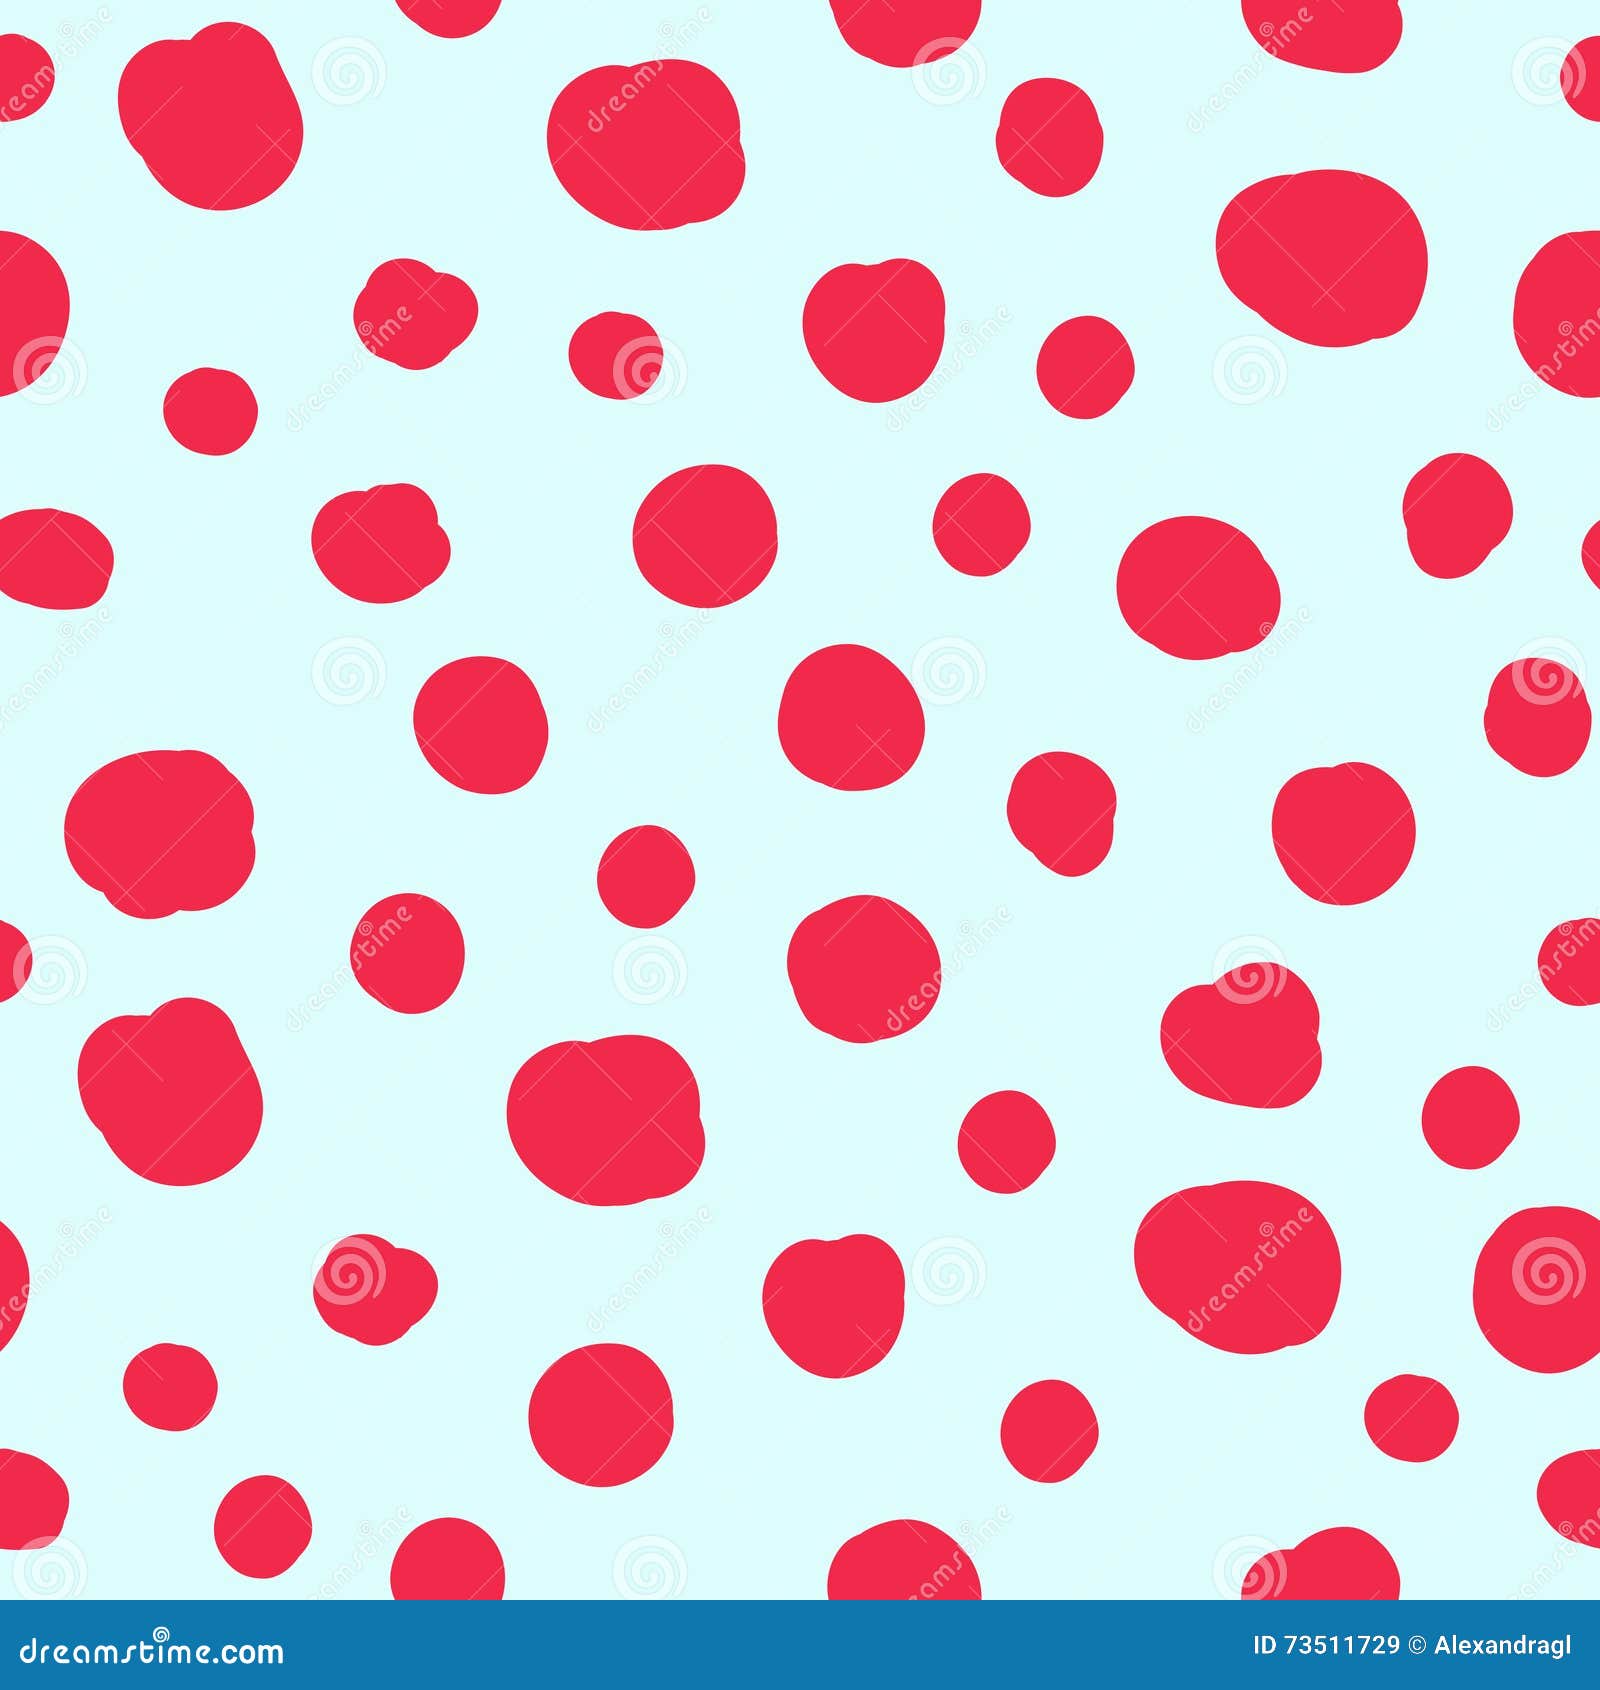  seamless pattern with red dots